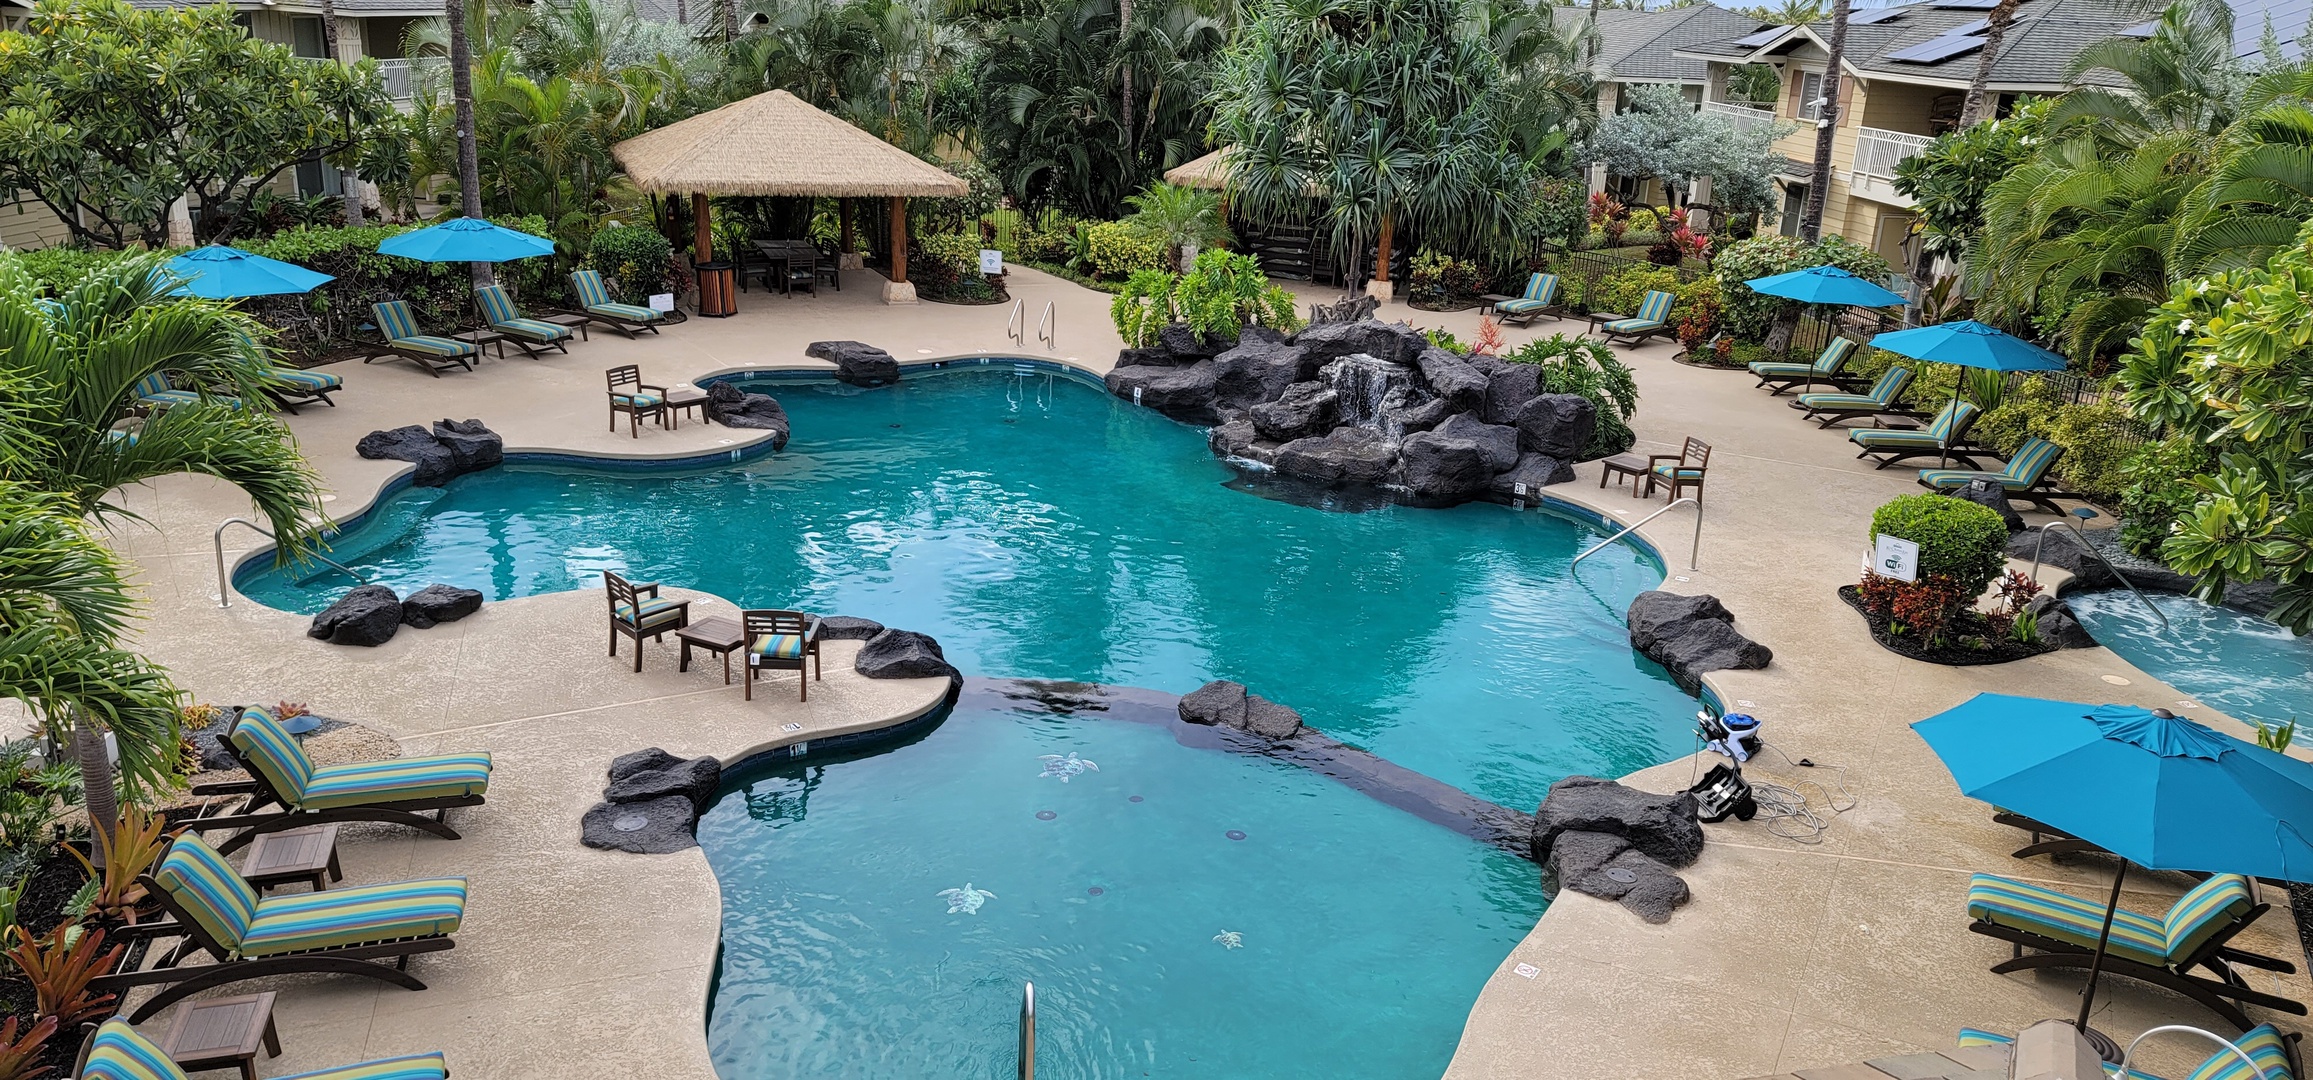 Kapolei Vacation Rentals, Ko Olina Kai 1083C - Go for a swim in the crystal blue waters of the pool.